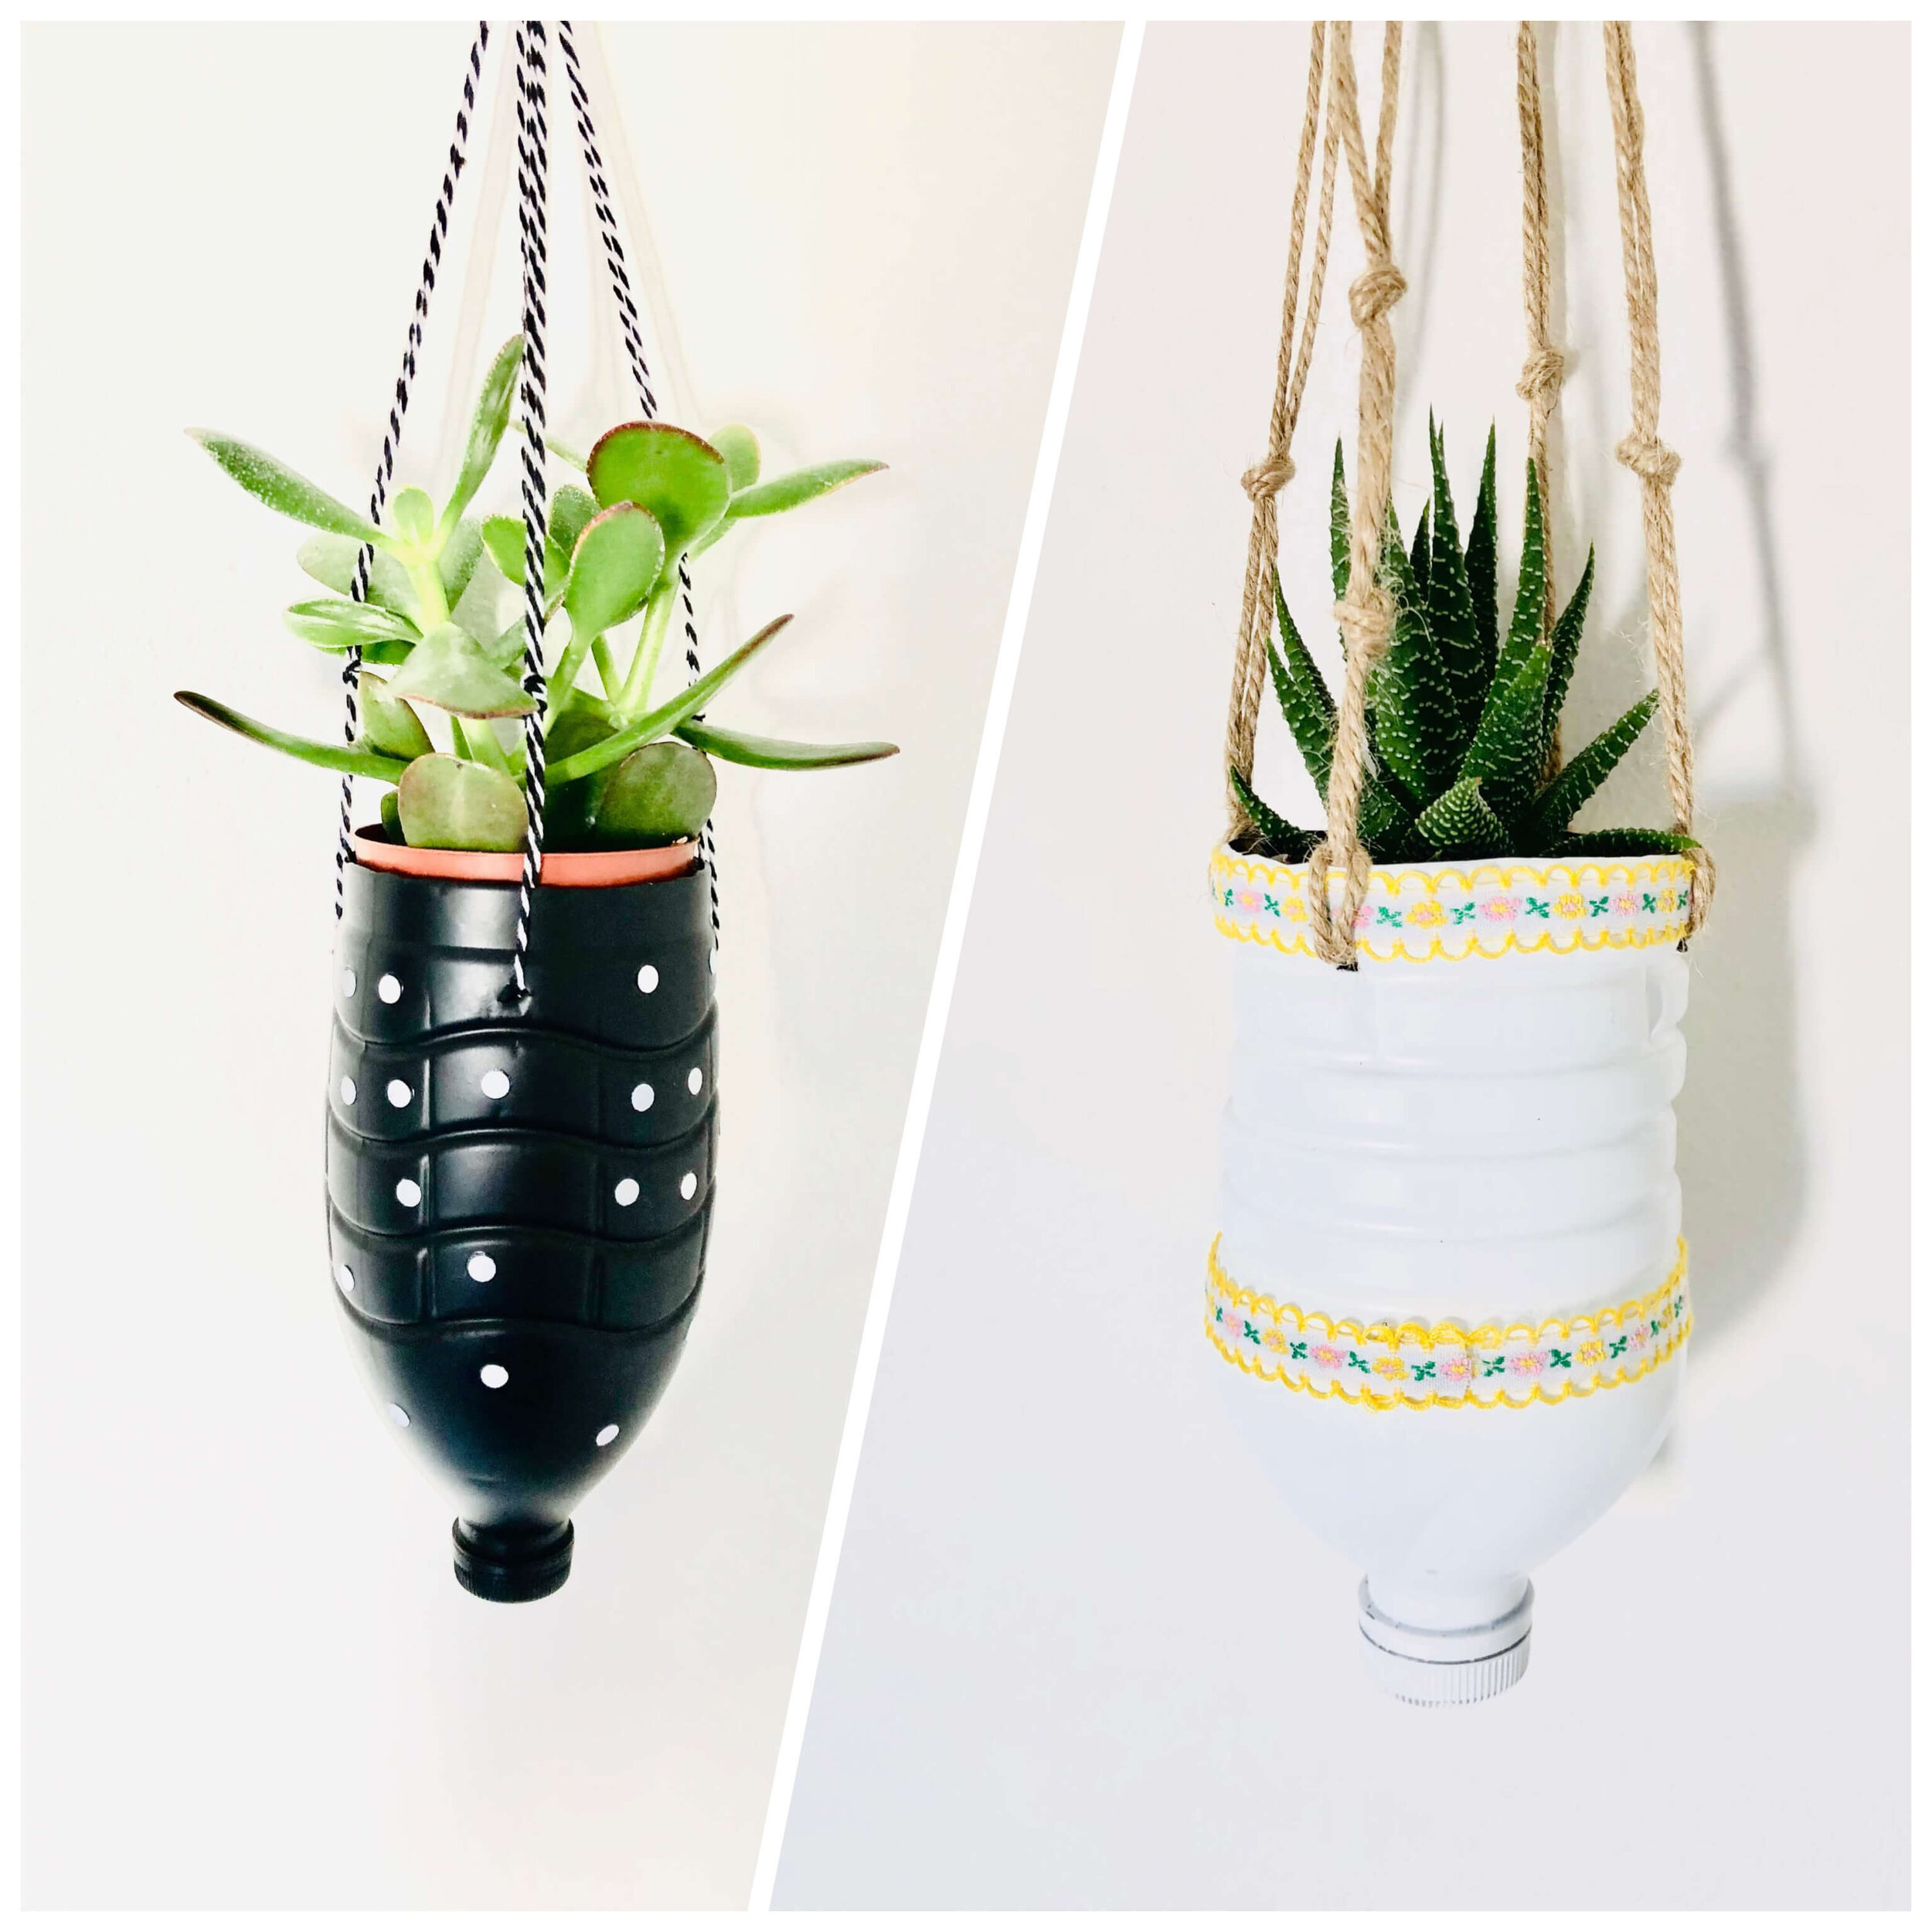 How To Make Hanging Flower Pots From Used Plastic Bottles — Caactus Care